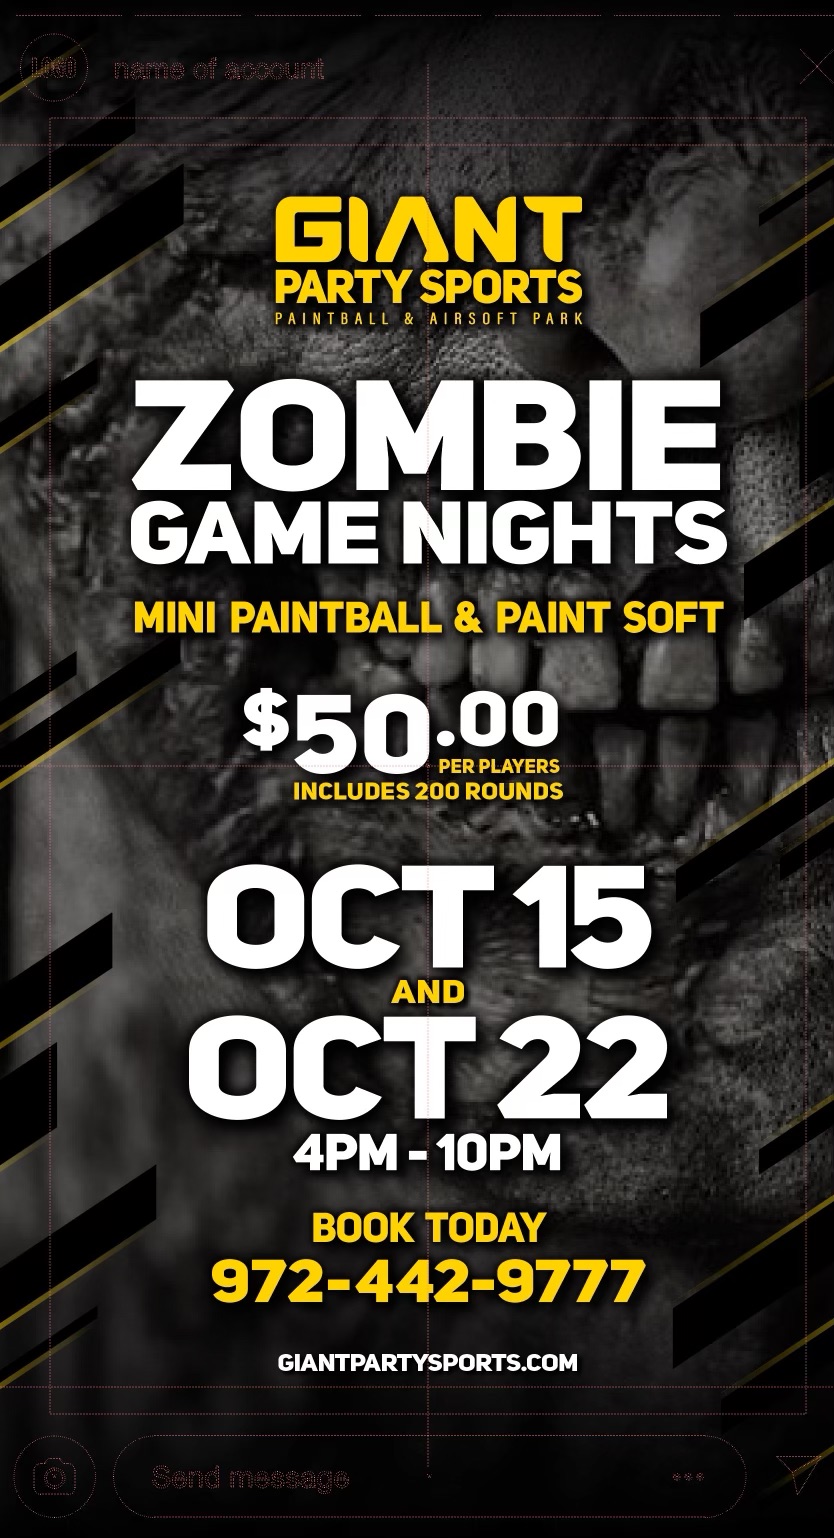 Giant Party Sports - Zombie Game Night